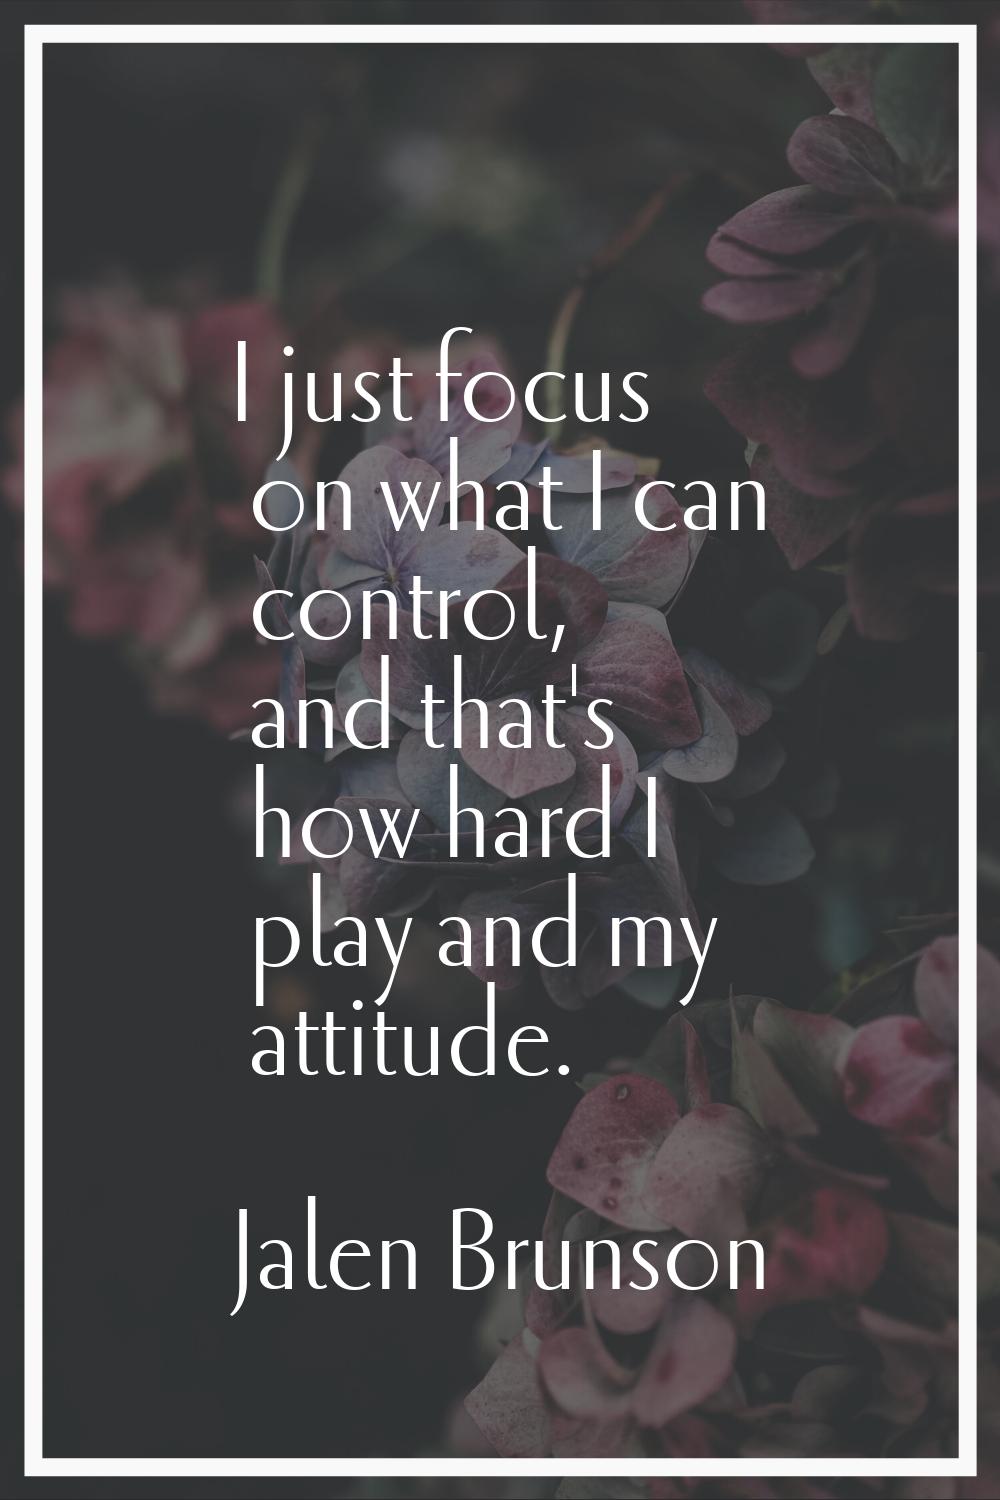 I just focus on what I can control, and that's how hard I play and my attitude.